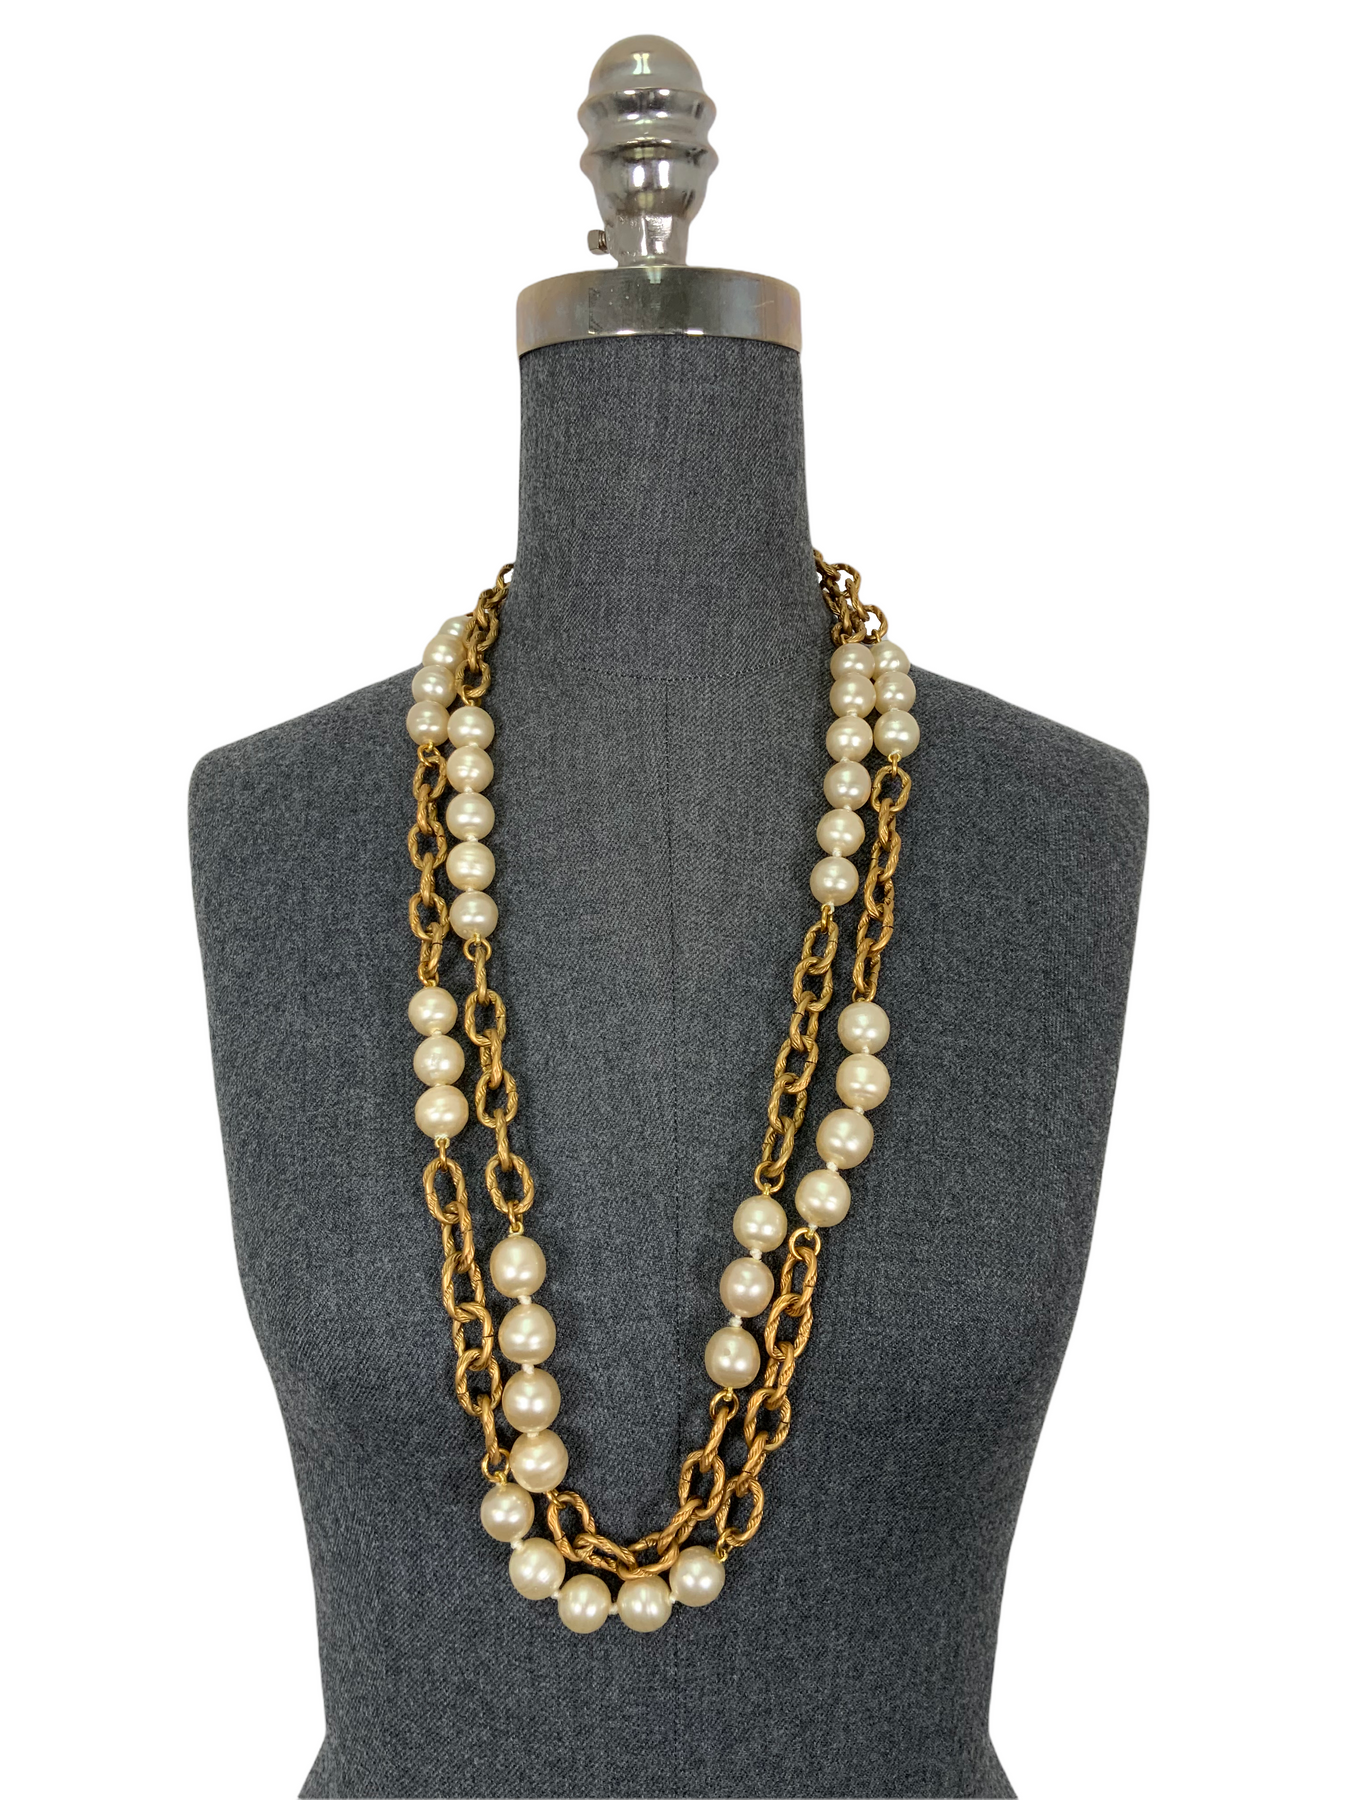 Chanel Vintage 1993 Chunky Chain Link Necklace